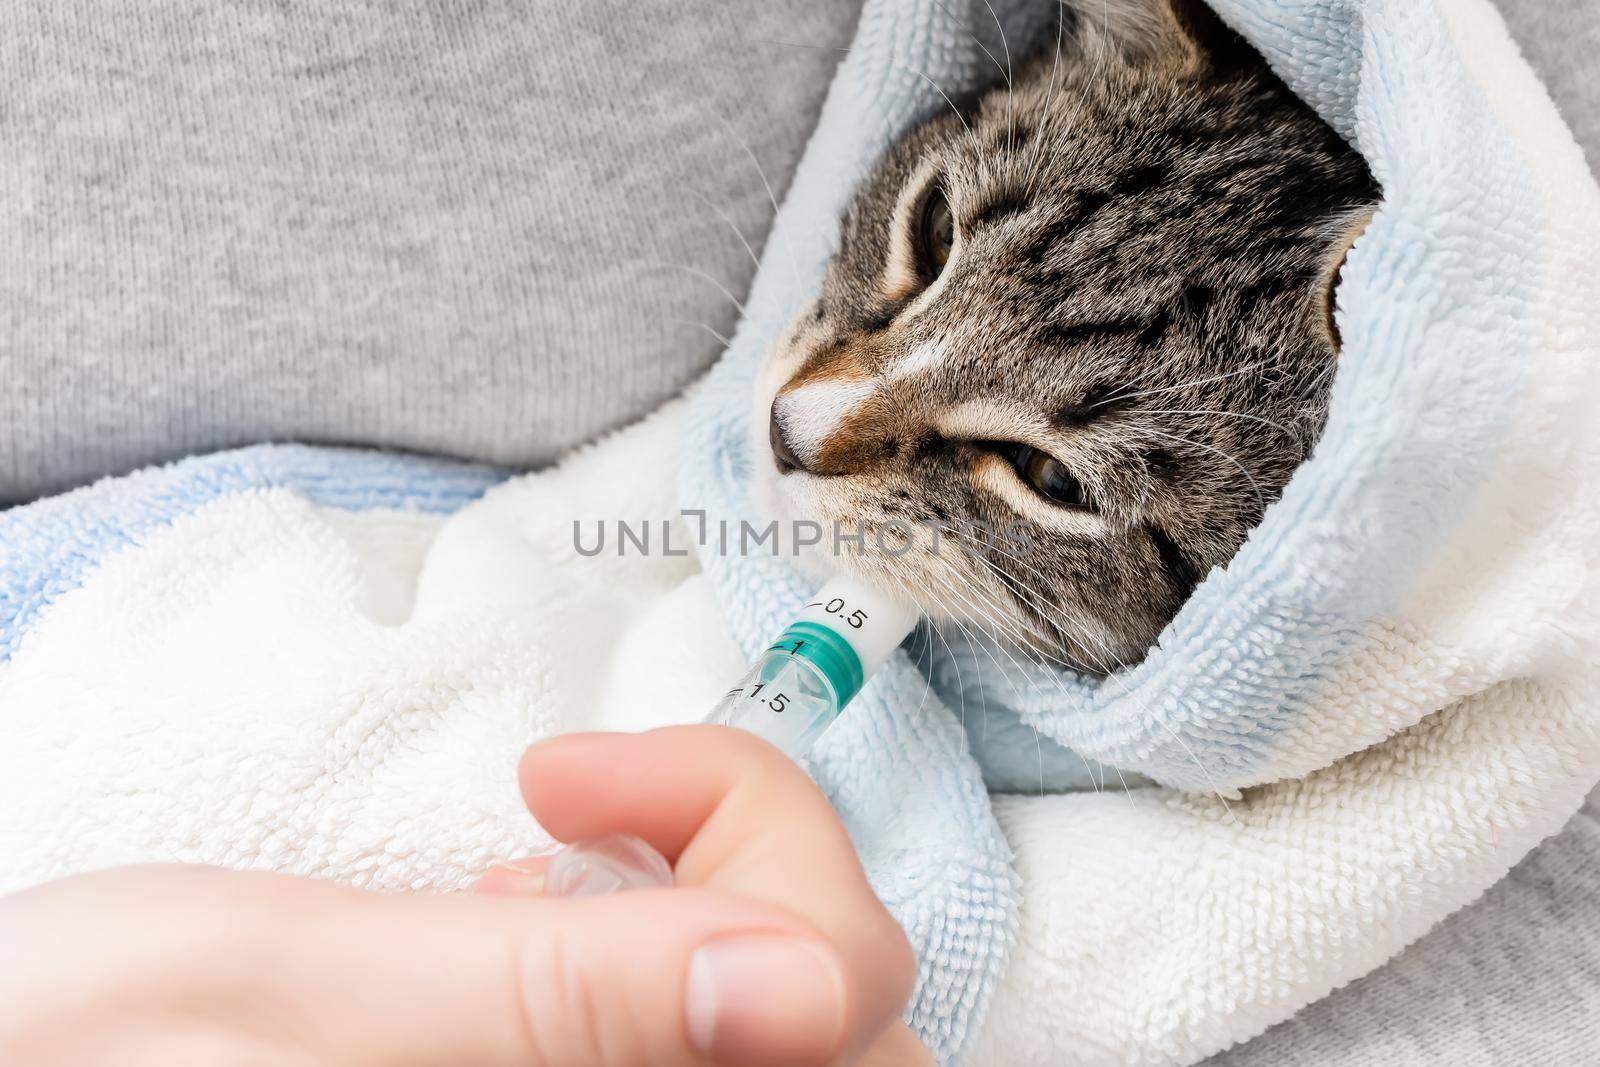 Kitten wrapped in a towel drinks medicine from a syringe.